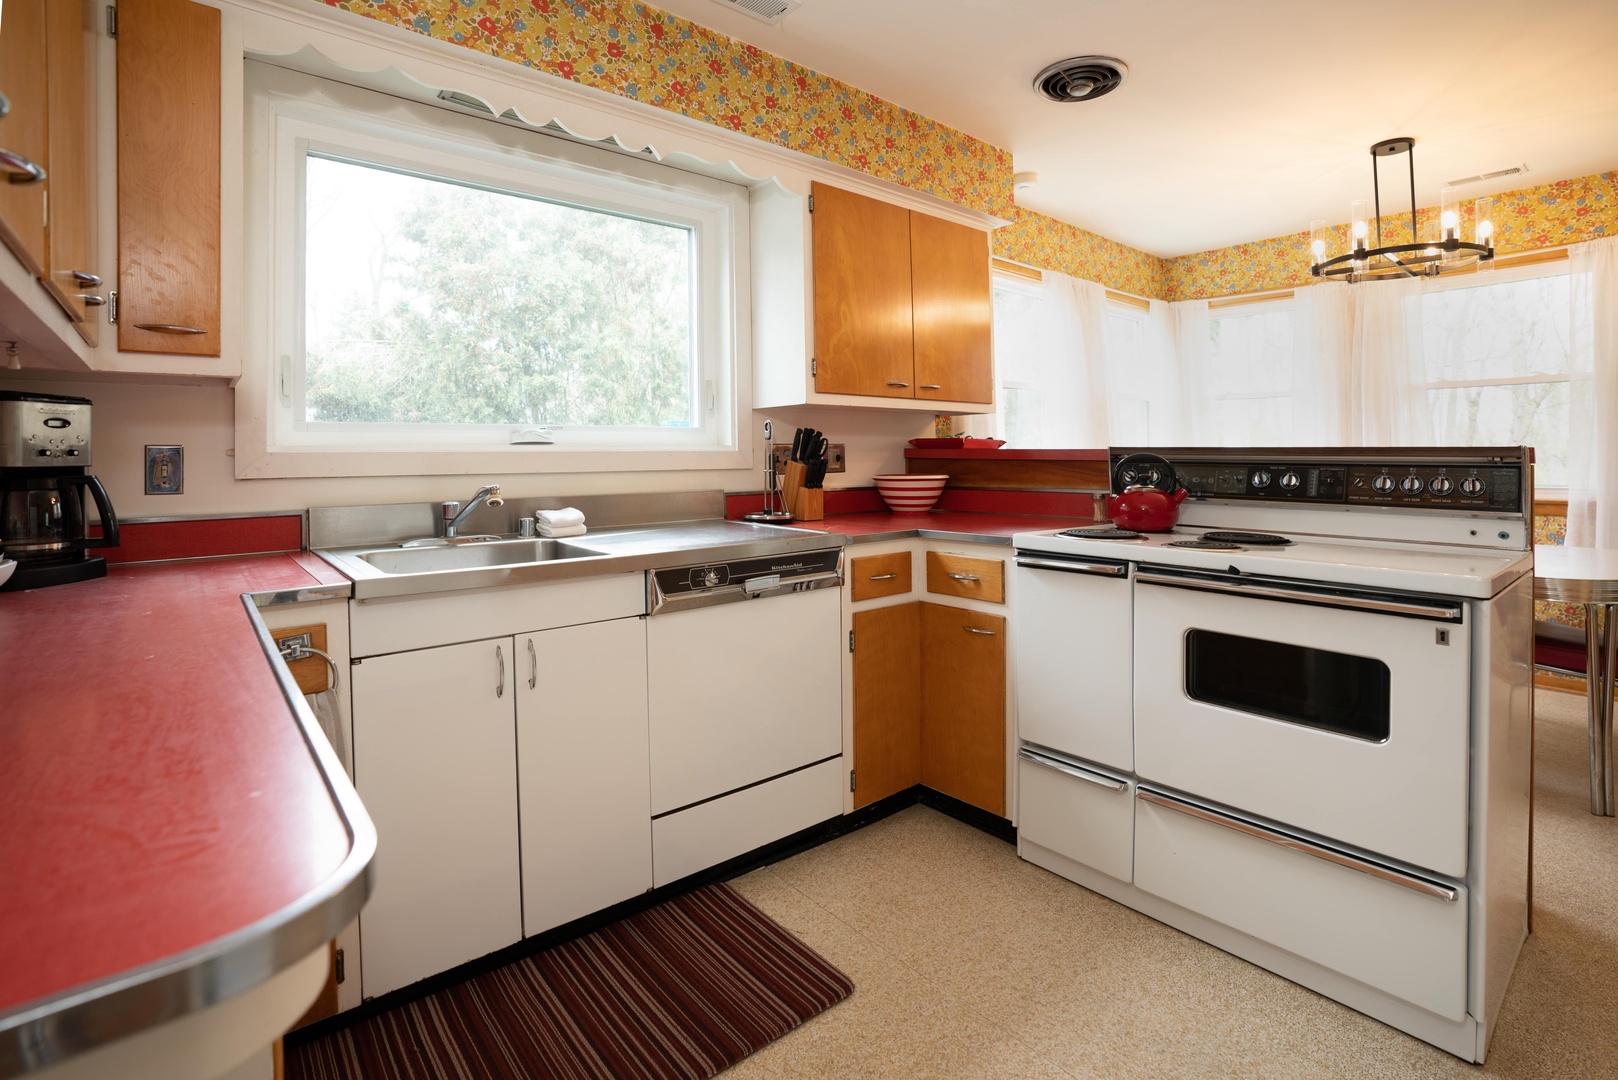 Savor the charm of the retro-style kitchen where every meal becomes a delight